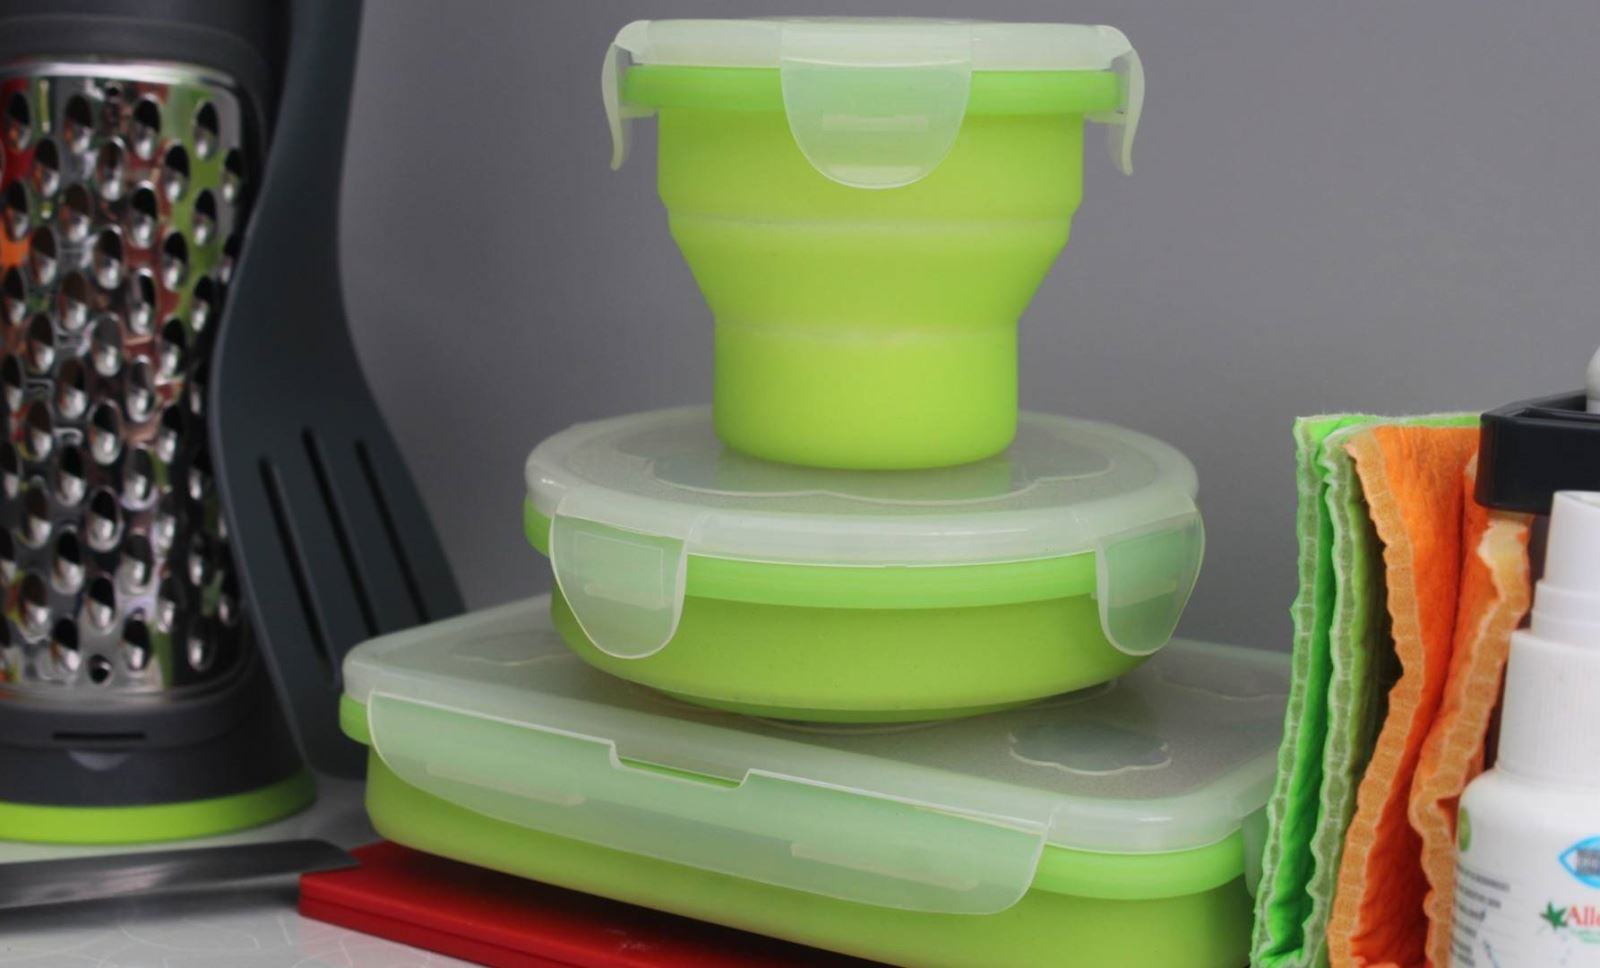 Foldable storage containers